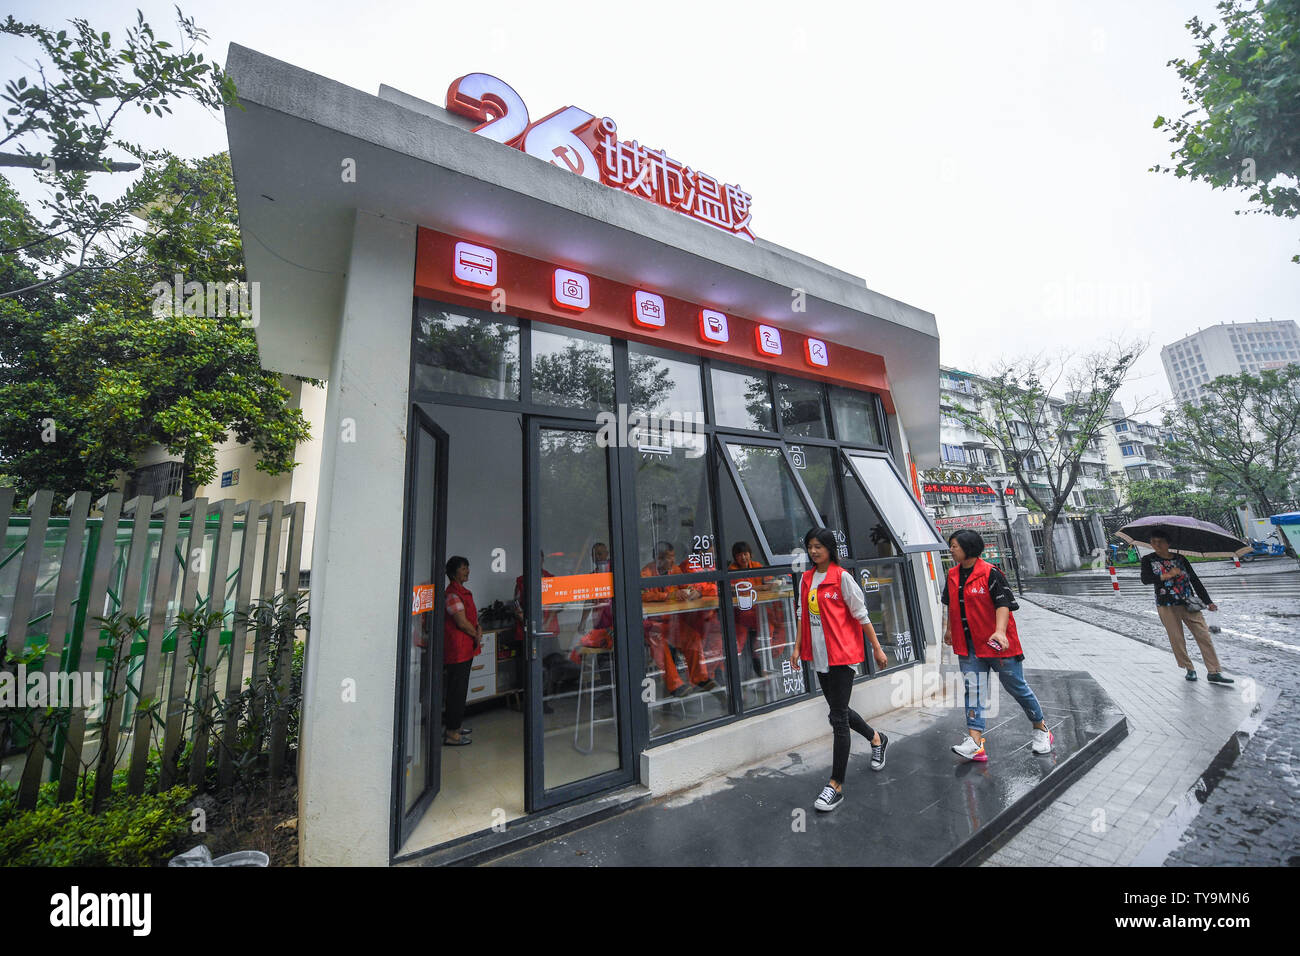 (190626) -- HUZHOU, June 26, 2019 (Xinhua) -- A public lounge is seen in Wuxing District in Huzhou, east China's Zhejiang Province, June 26, 2019. More than 50 public lounges have been put into use in Wuxing District, where weary outdoor workers and common citizens can drink water, rest, charge their phones as well as escape the searing sun. (Xinhua/Xu Yu) Stock Photo